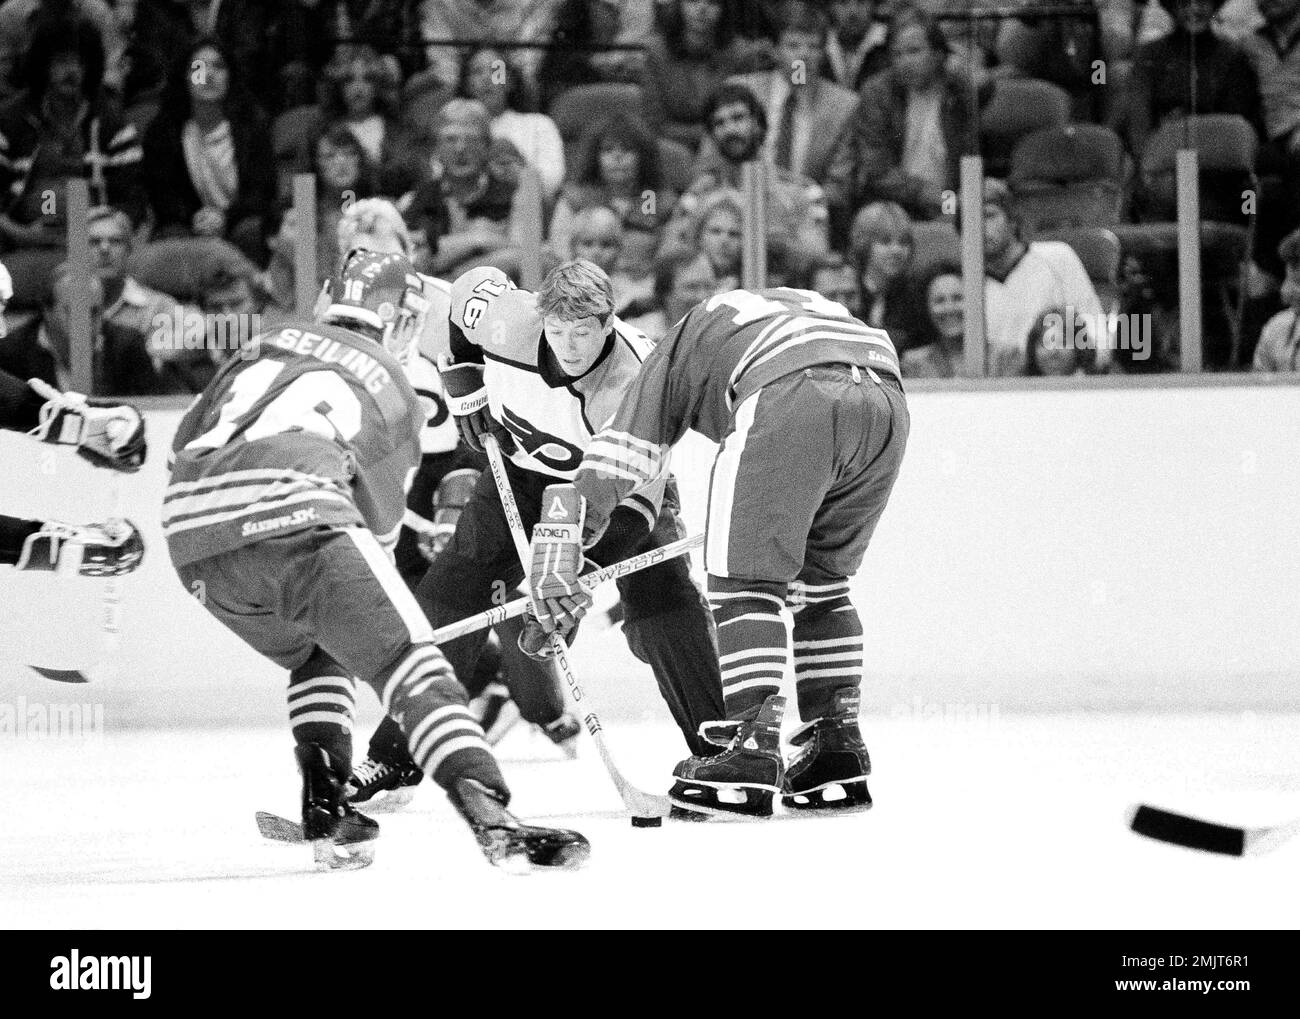 Philadelphia Flyers Bobby Clarke, left, collides with Toronto Maple Leafs  Dan Daust as they battle for the puck during first period NHL action in  Philadelphia, March 25, 1983. The Flyers won 7-4. (